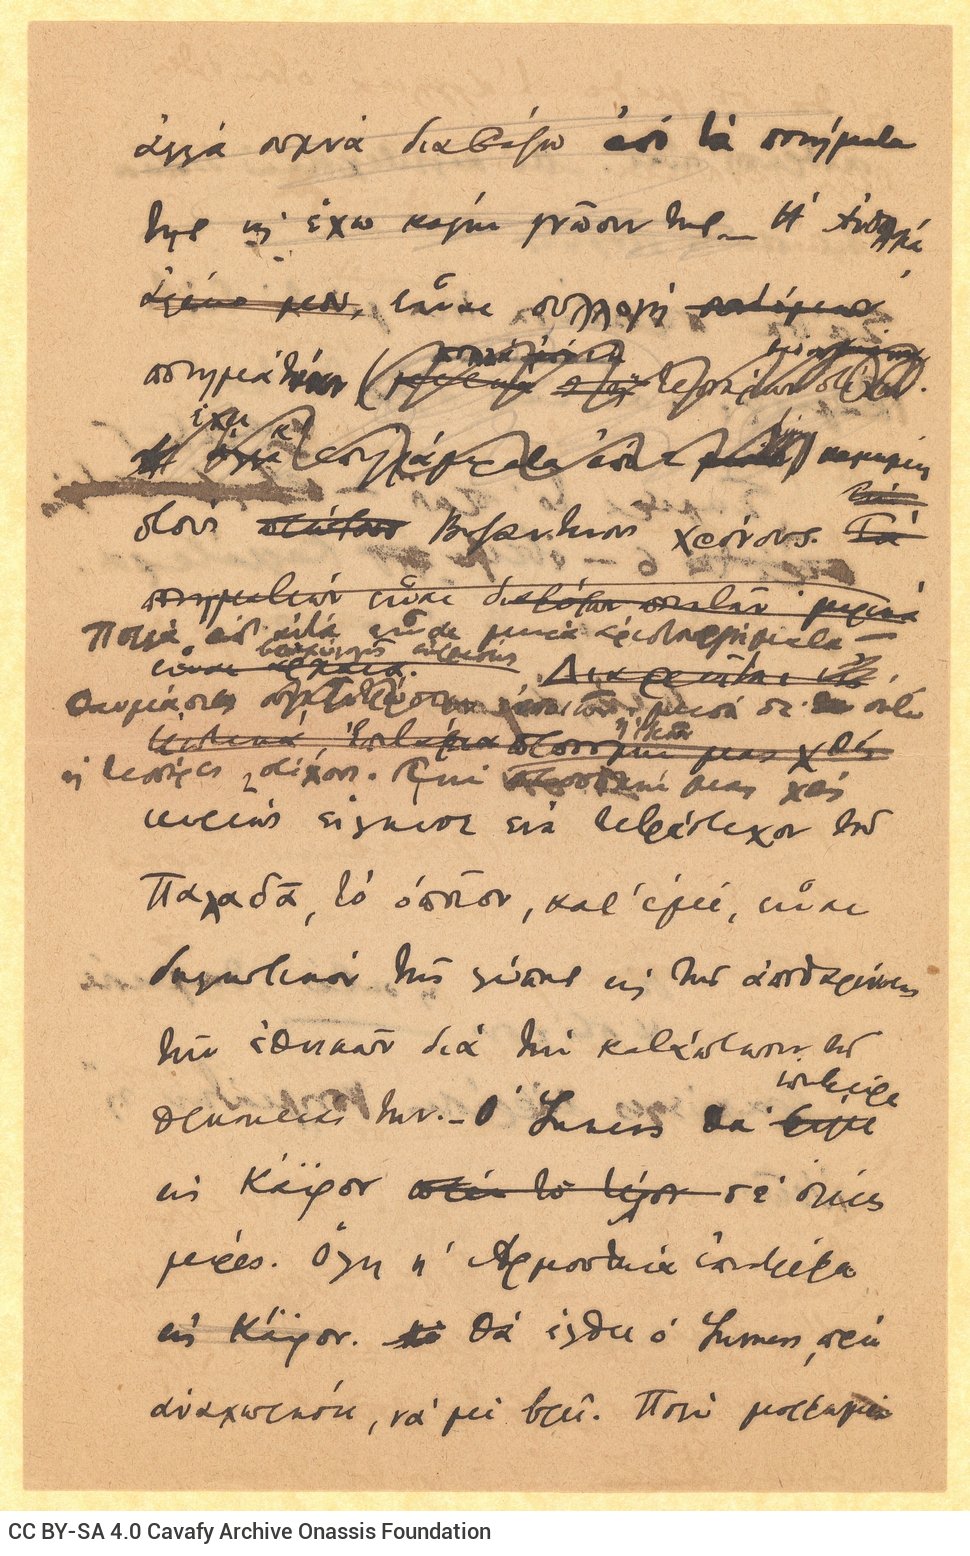 Draft letter by Cavafy to Alekos [Singopoulo] on all sides of two sheets. Satisfaction regarding Singopoulo's professional ca